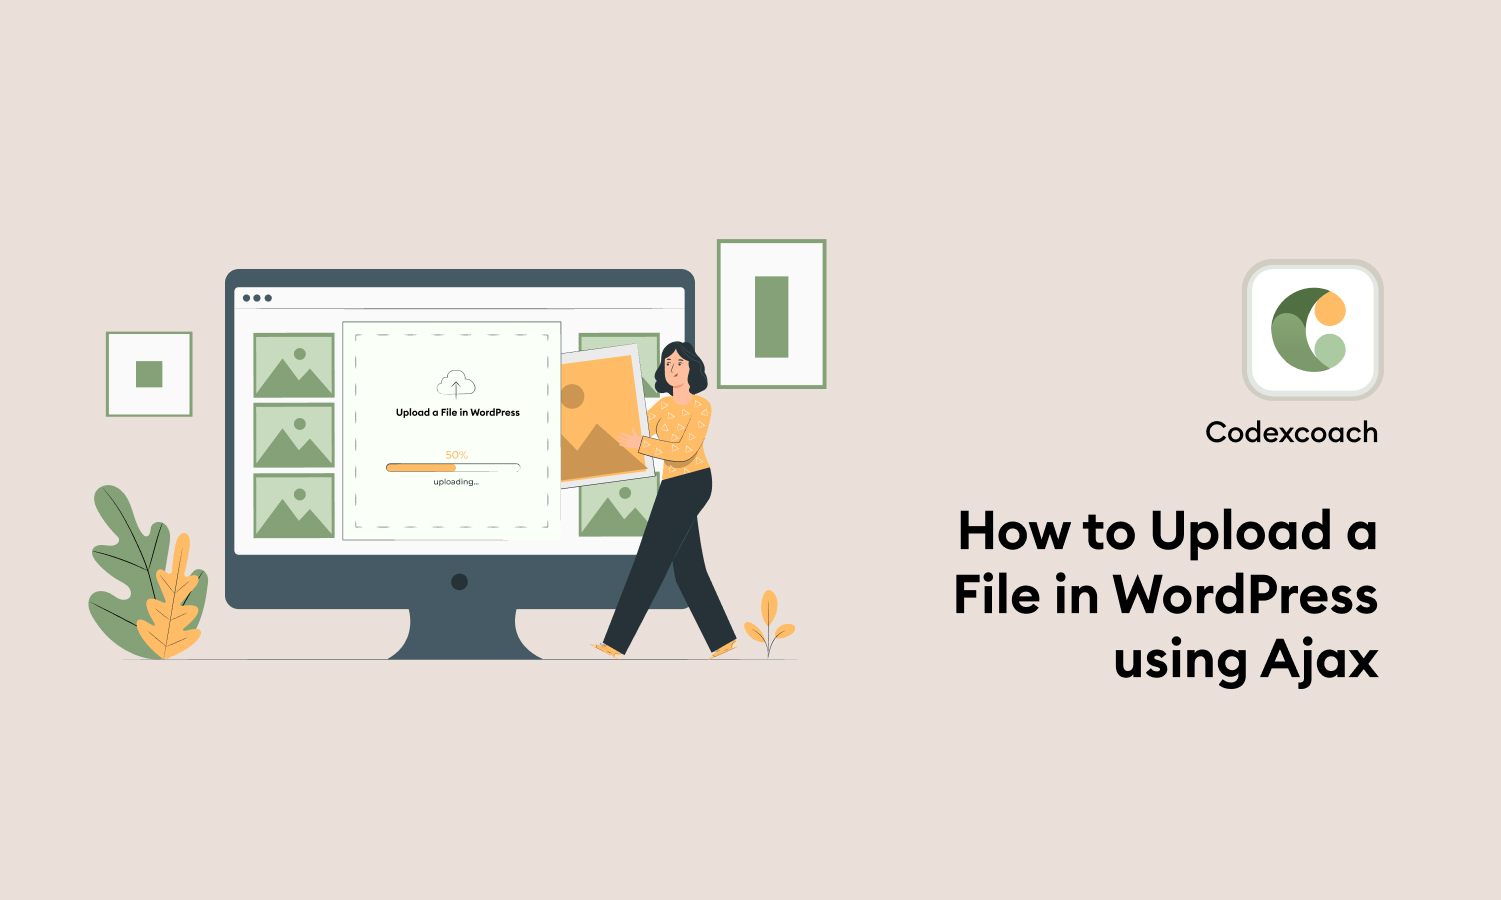 How to Upload a File in WordPress using Ajax